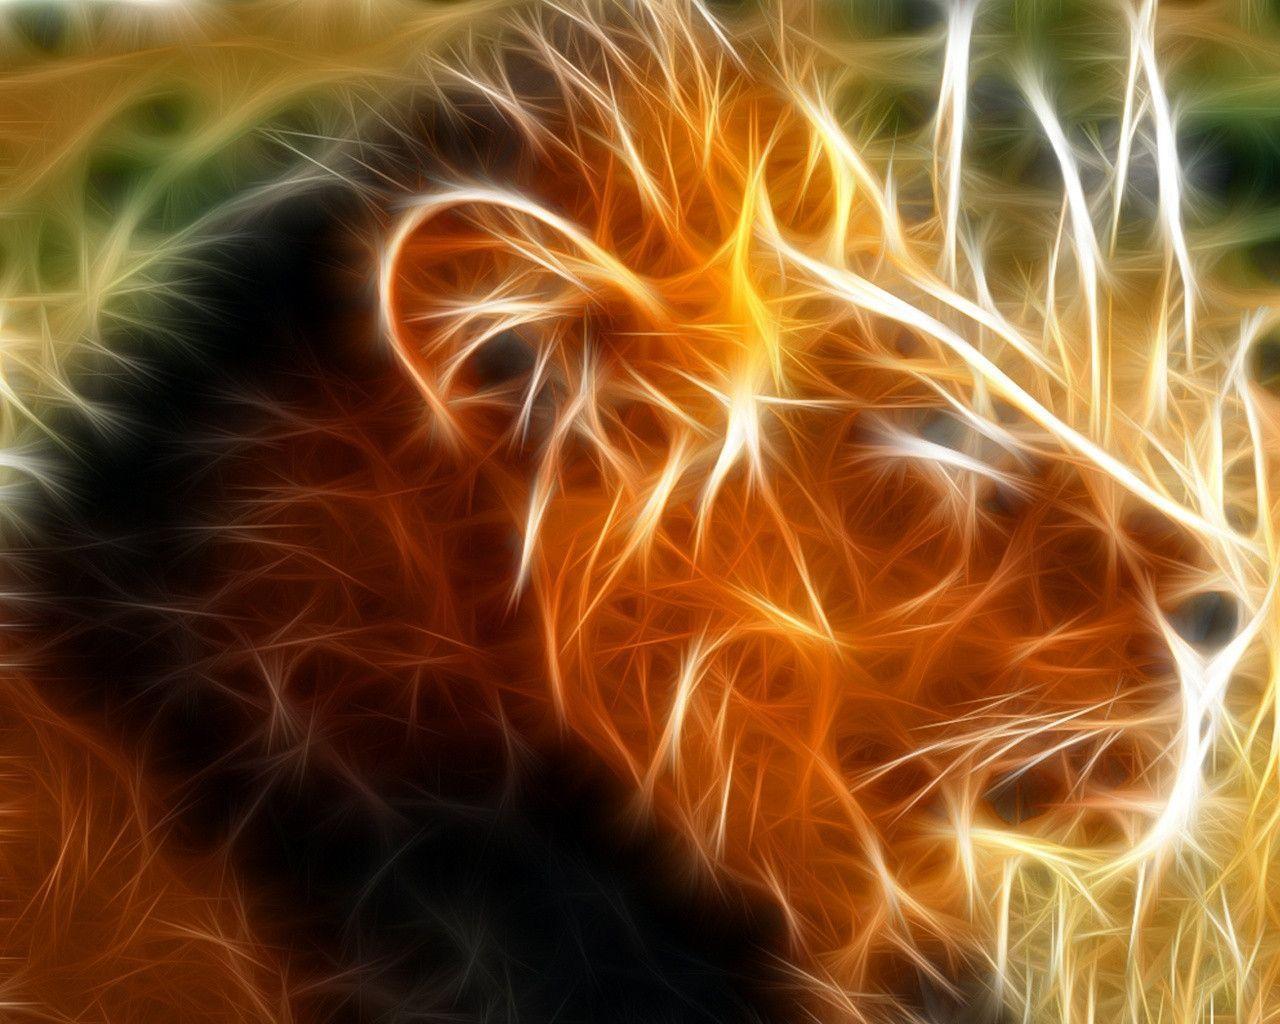 Cool Lion Wallpapers